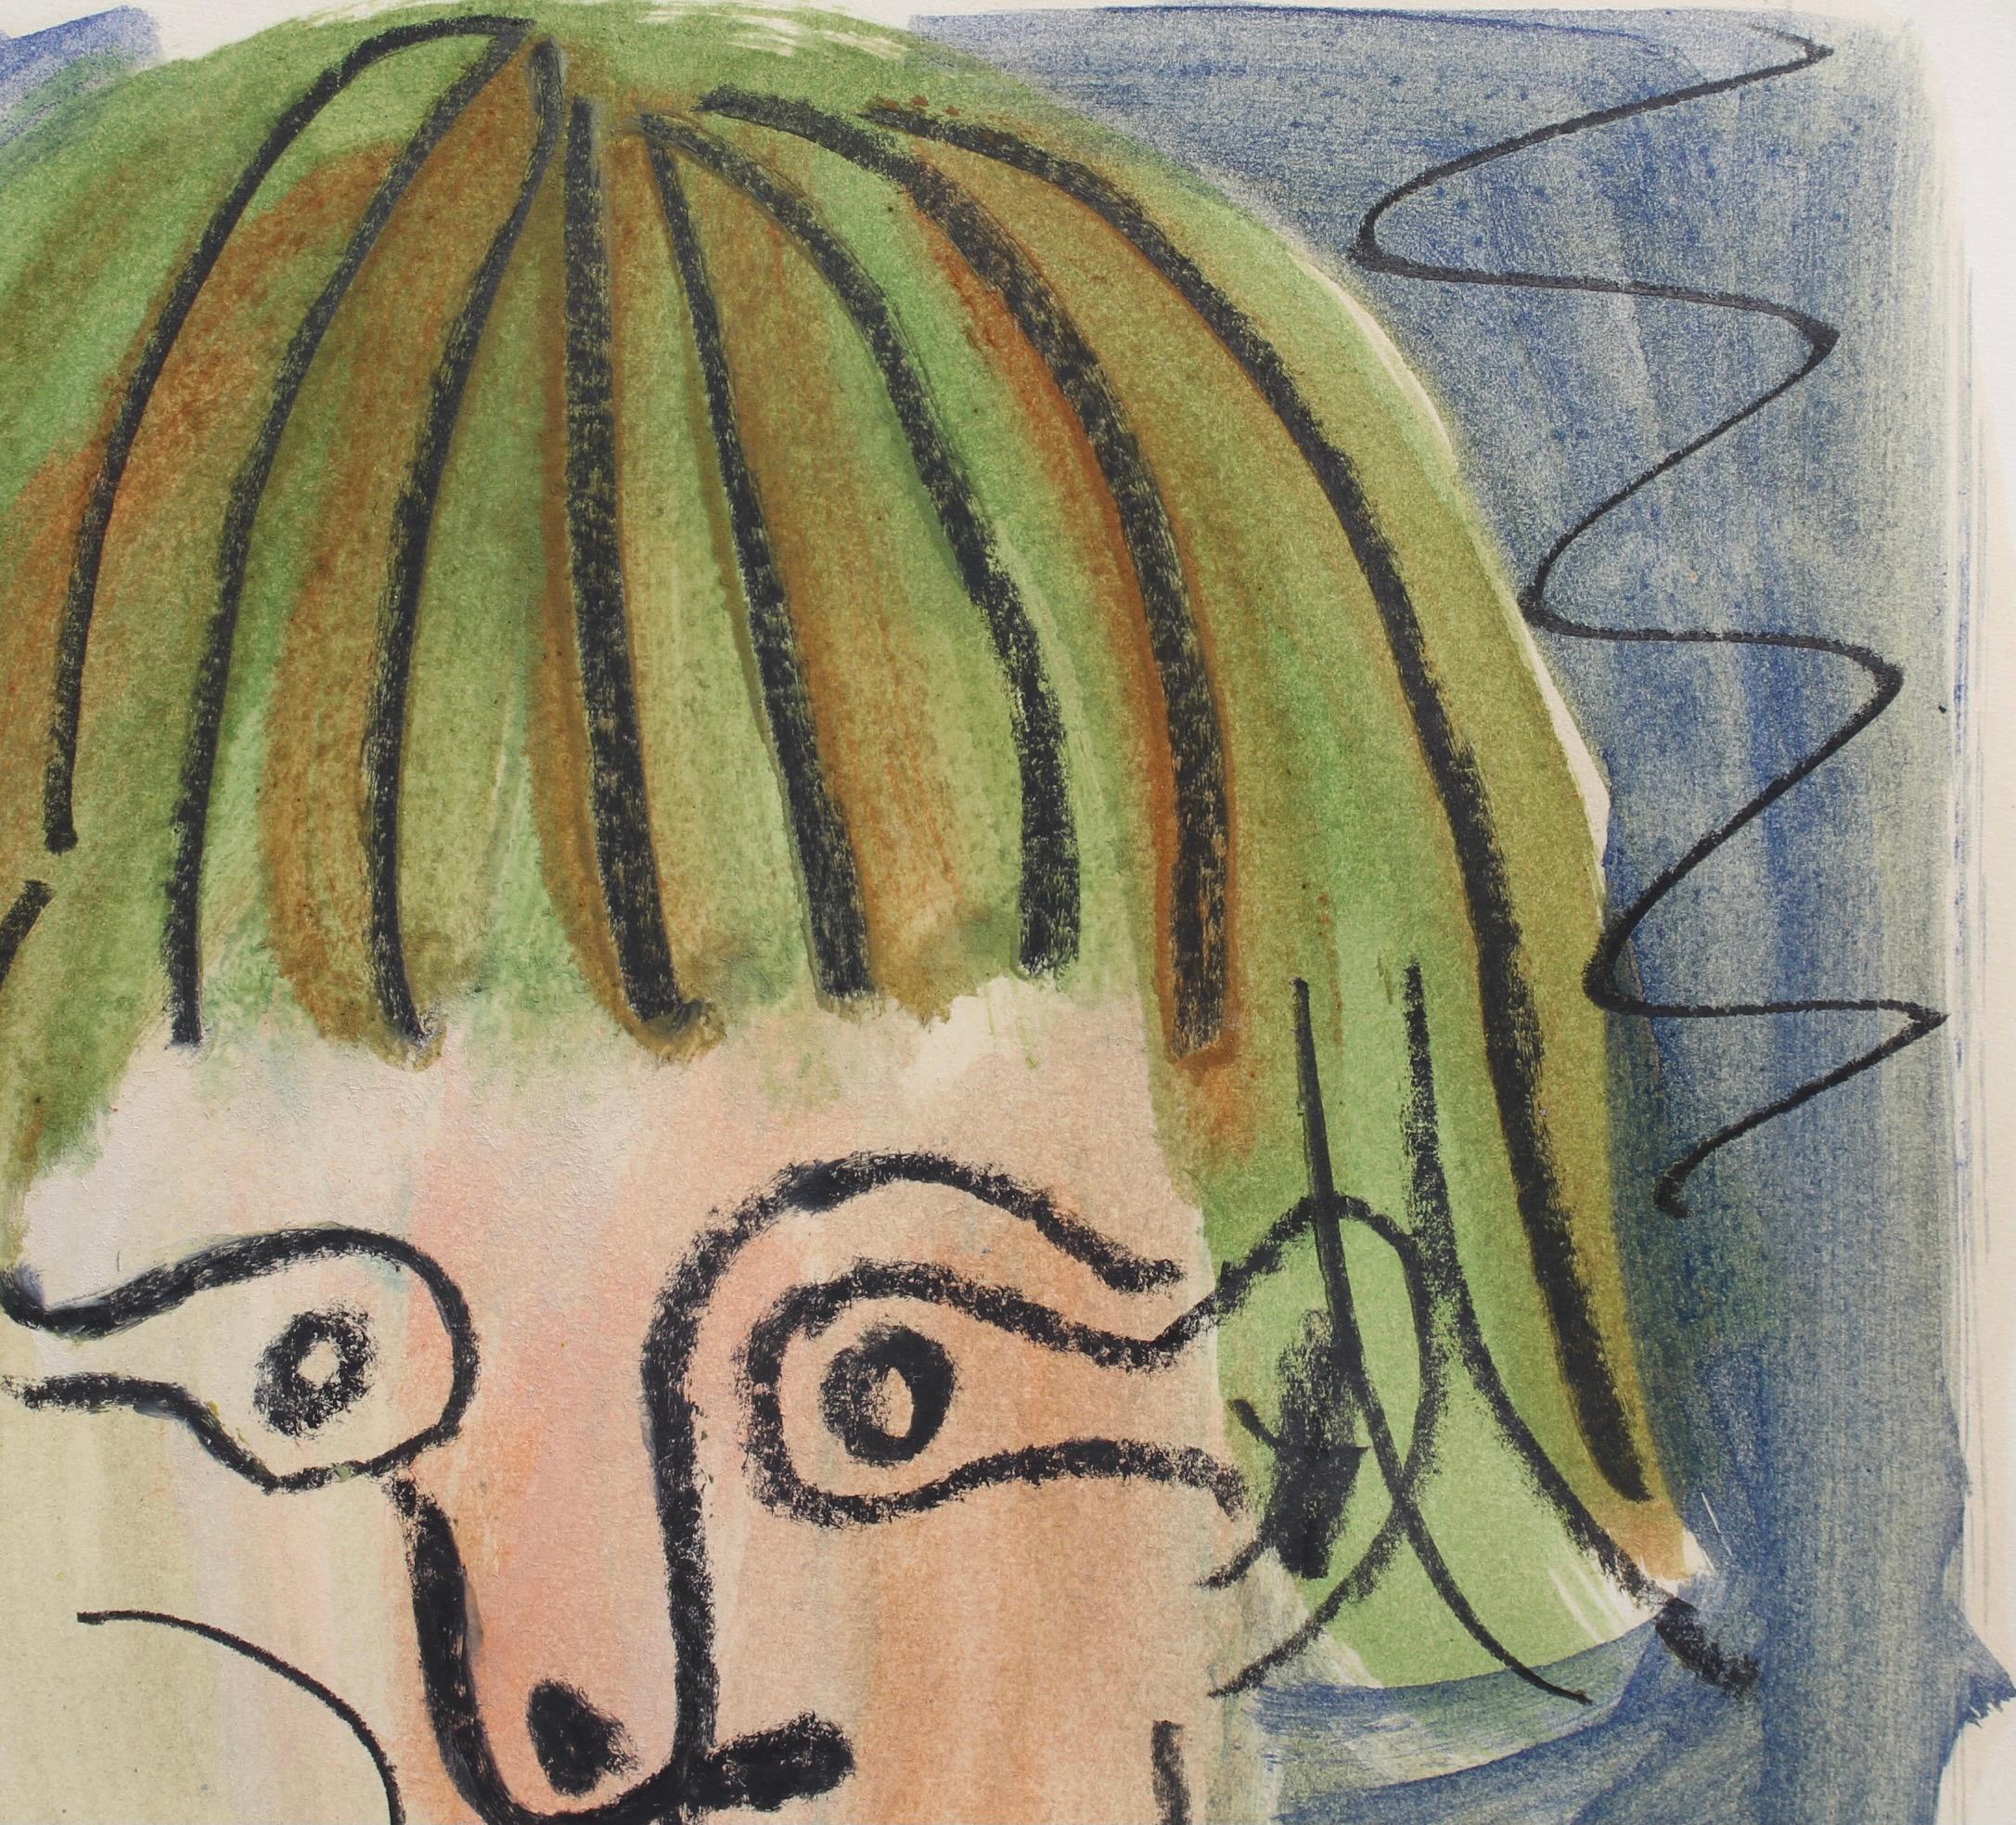 'Portrait of a Girl', gouache and crayon on fine paper (1966), by Raymond Debiève (1931 - 2011). Here the artist paints a young girl with blond hair in his post-cubist style. Clearly this is an affectionately-created portrait of someone close to